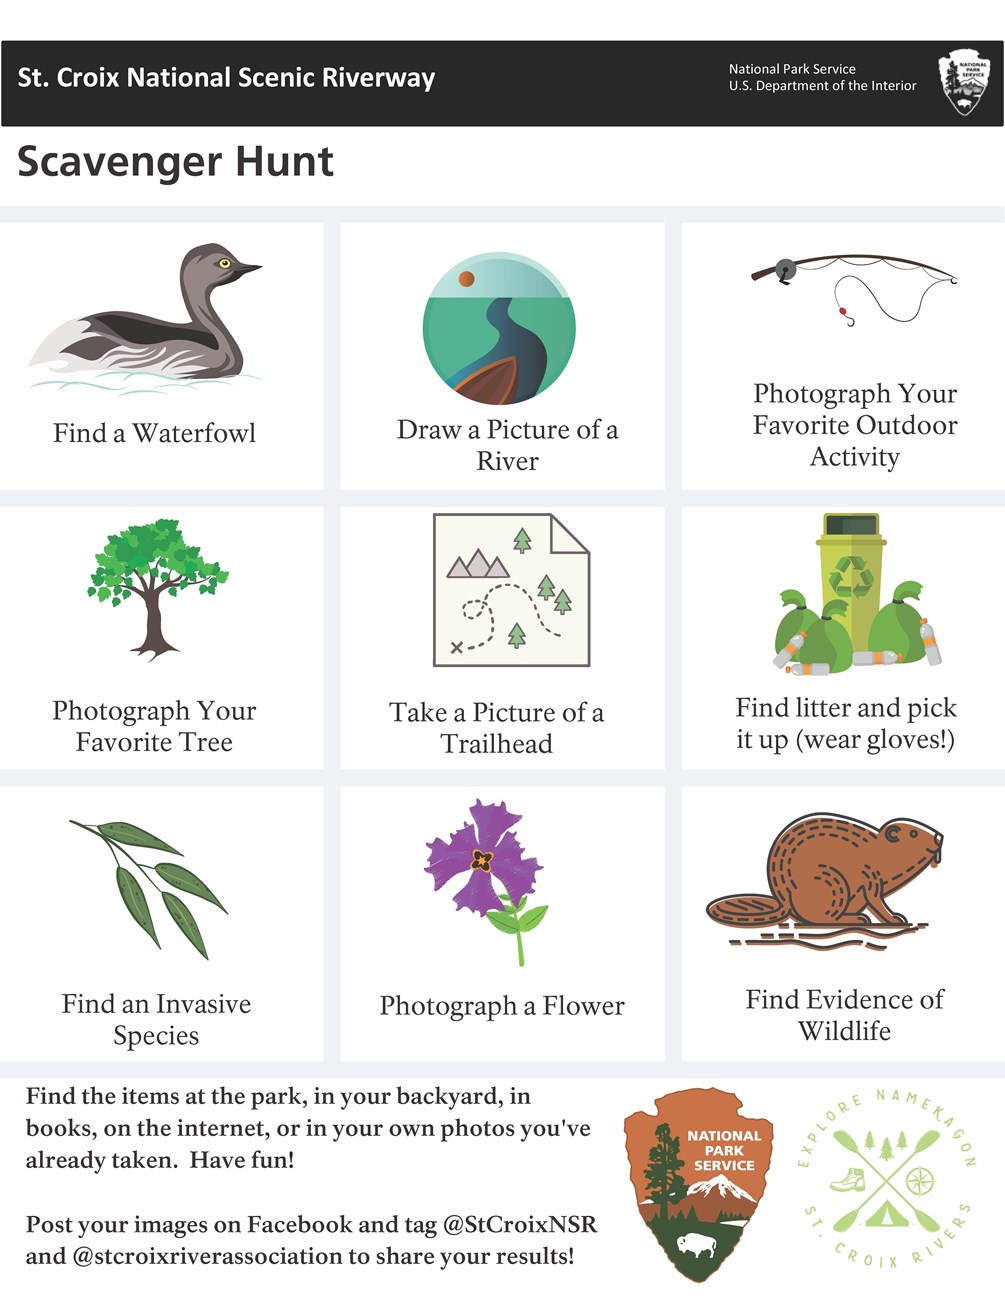 A list of items to find: a Waterfowl, Draw a Picture of a River, Photograph Your Favorite Outdoor Activity, Your Favorite Tree, a Trailhead, and a Flower; Find an Invasive Species, evidence of wildlife, and litter (pick it up if you have gloves).